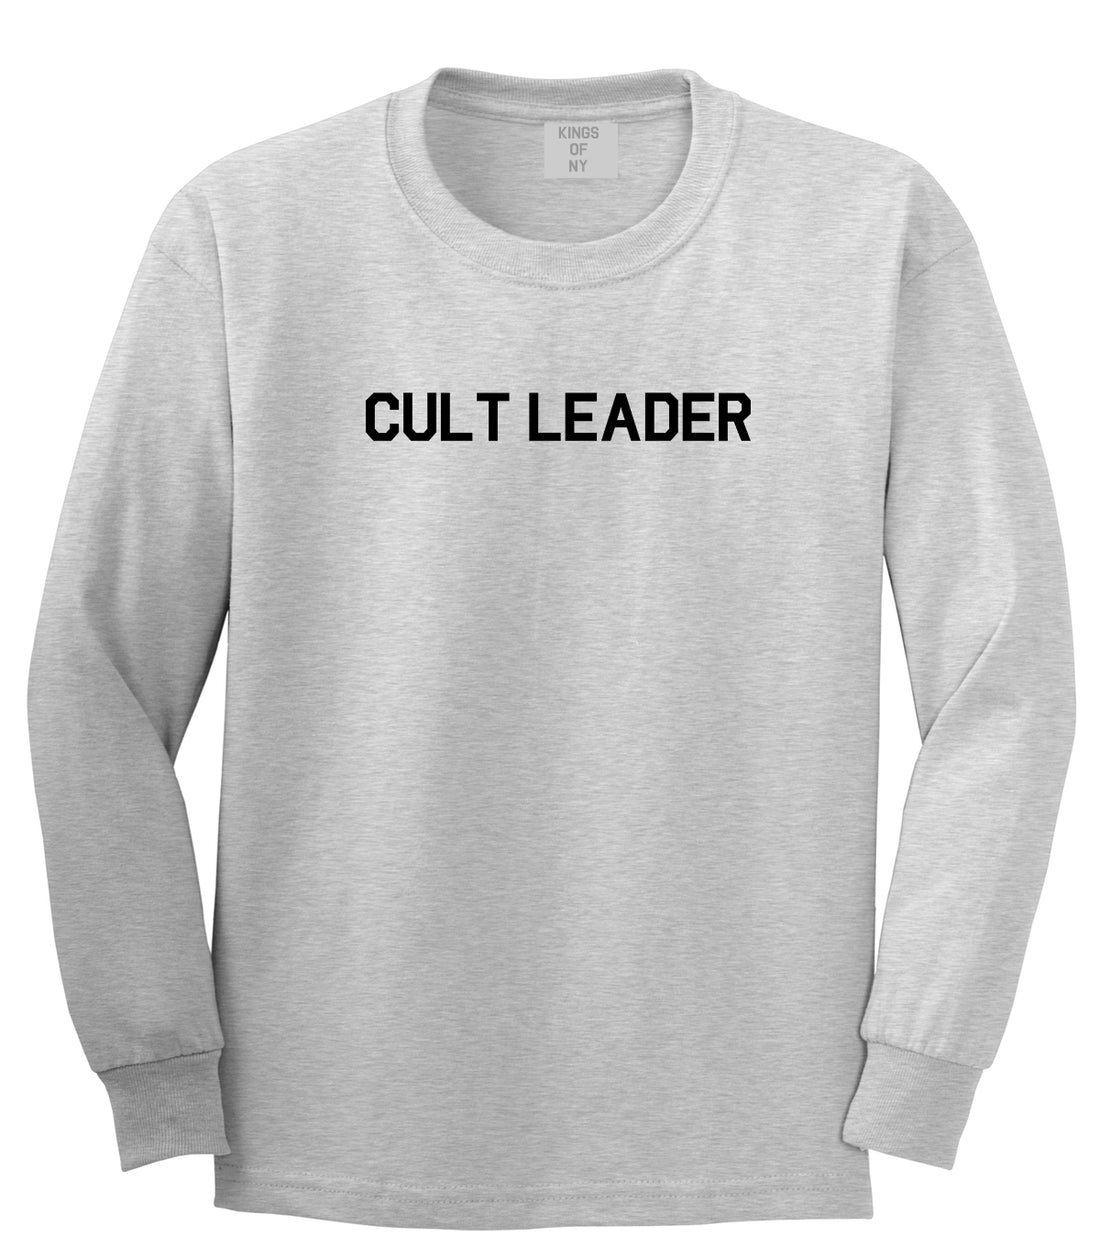 Cult Leader Costume Mens Long Sleeve T-Shirt Grey by Kings Of NY